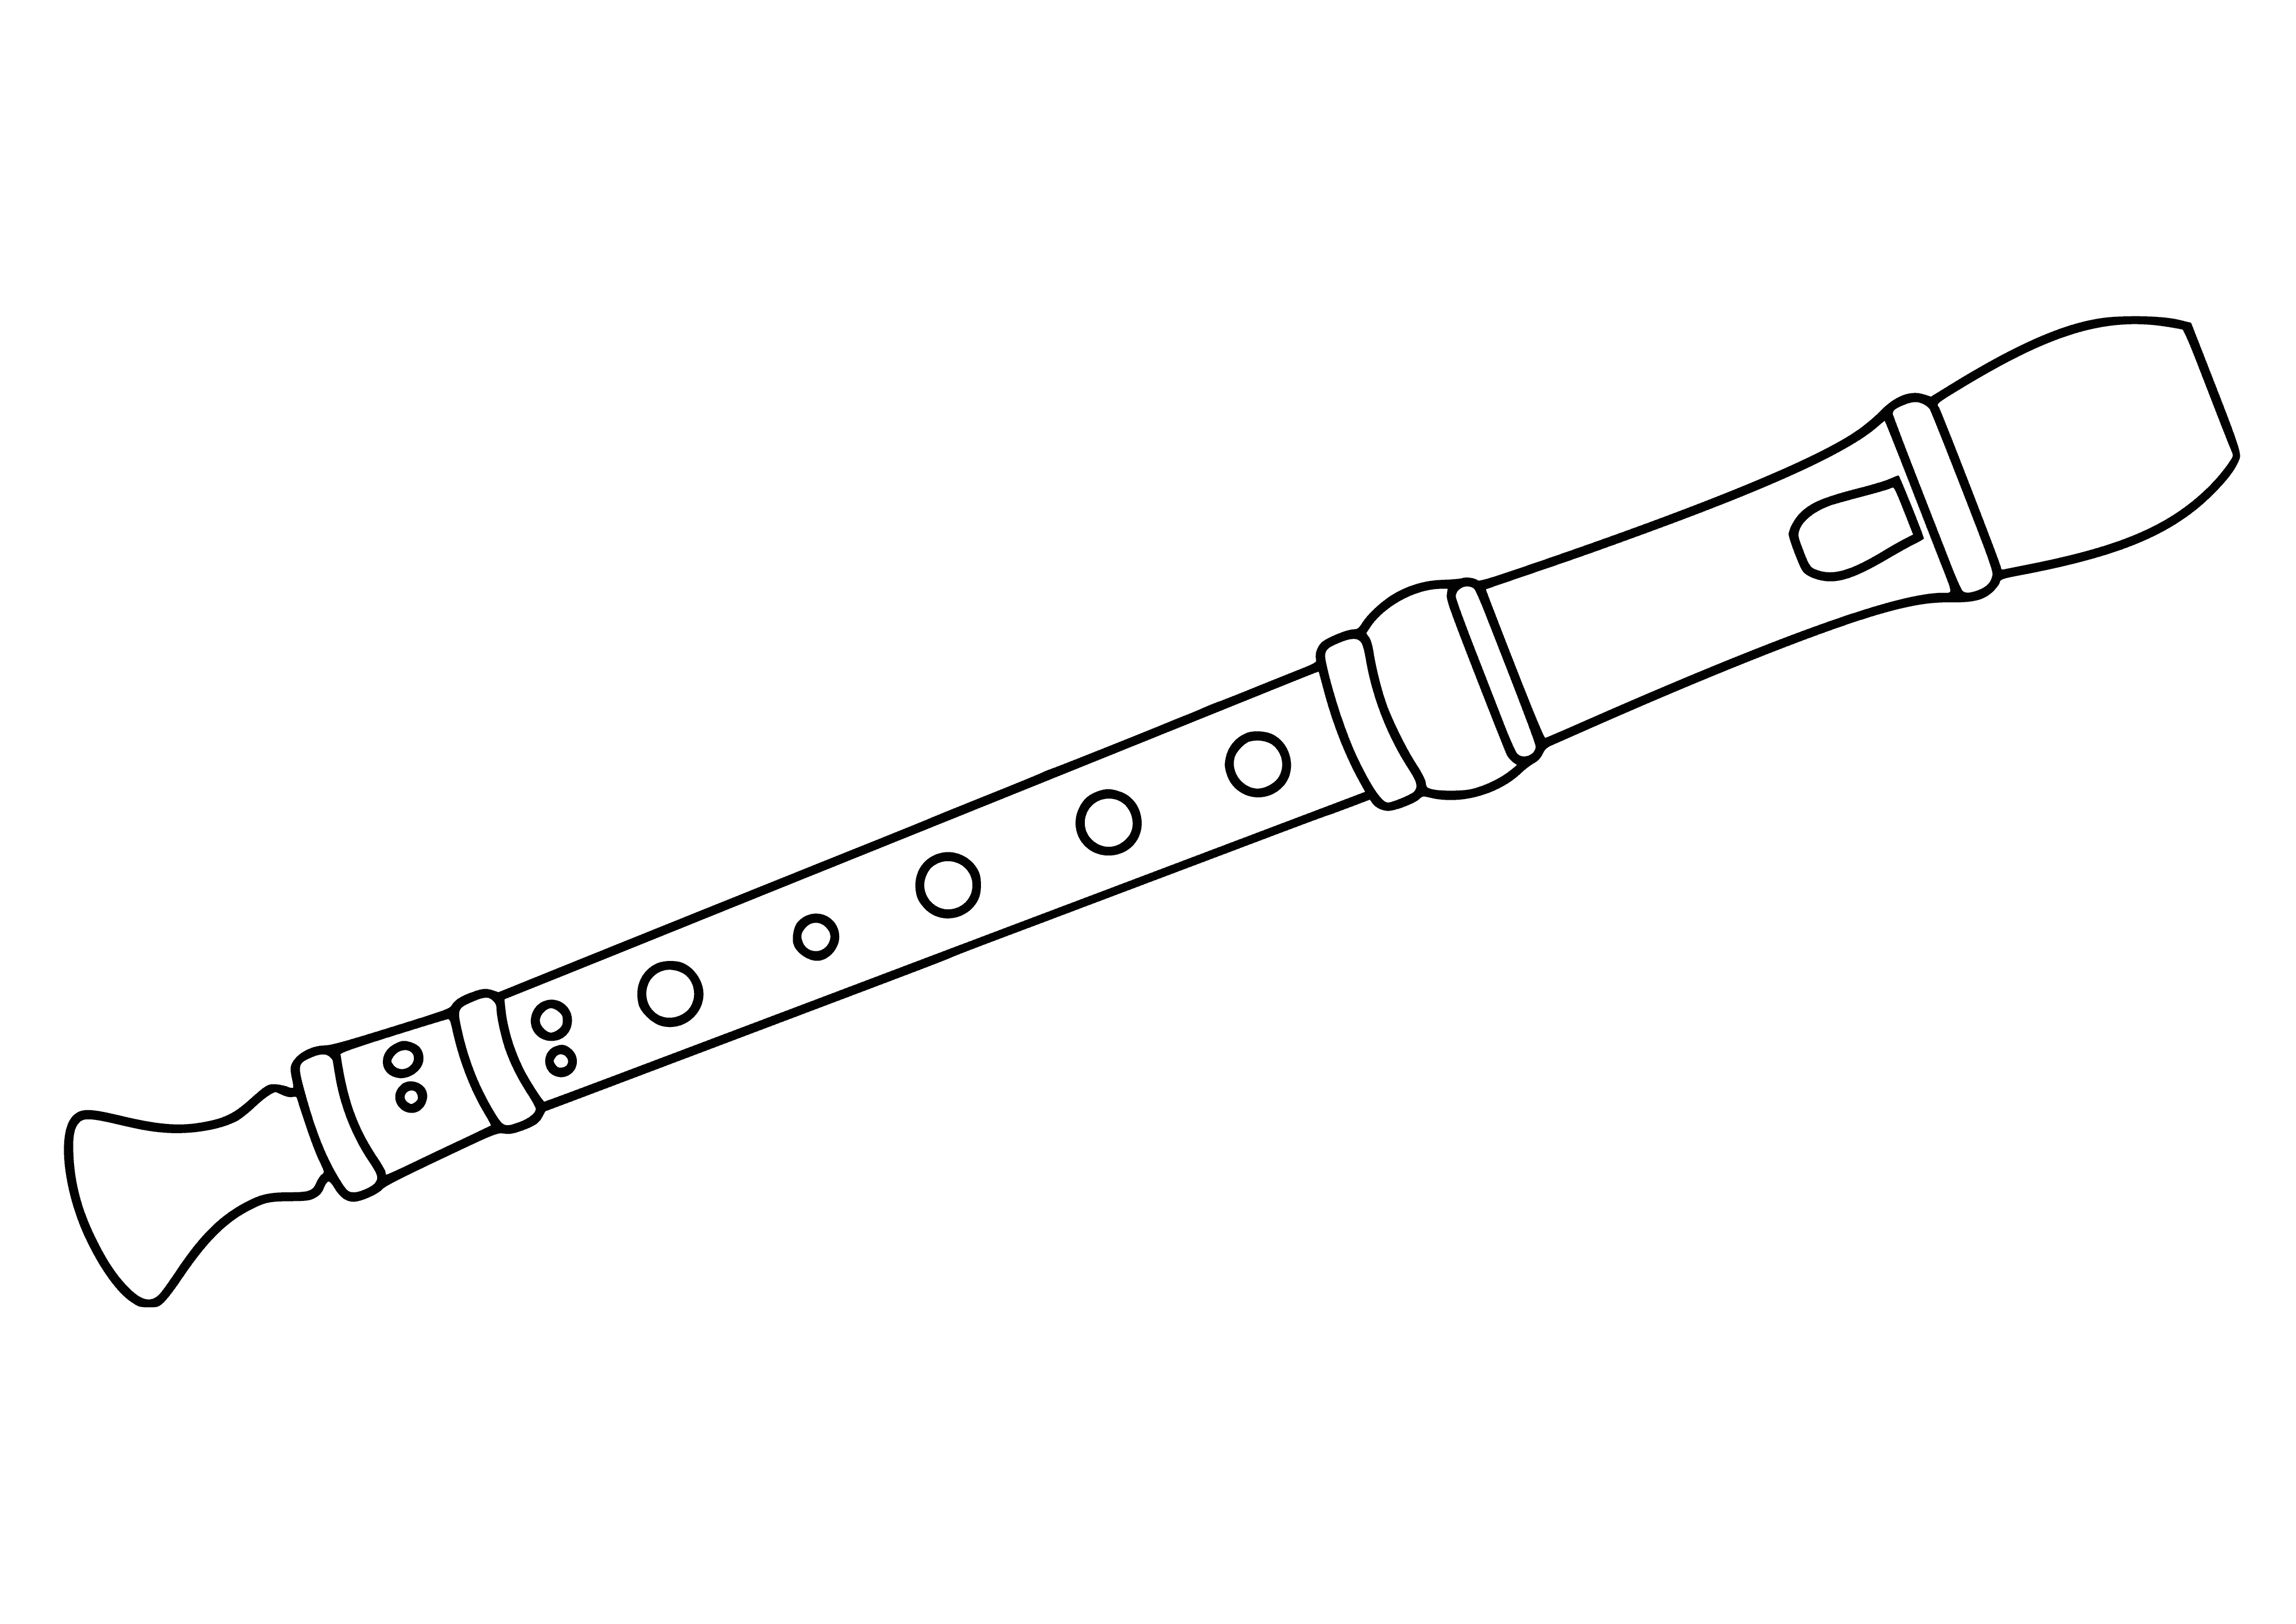 The flute coloring page